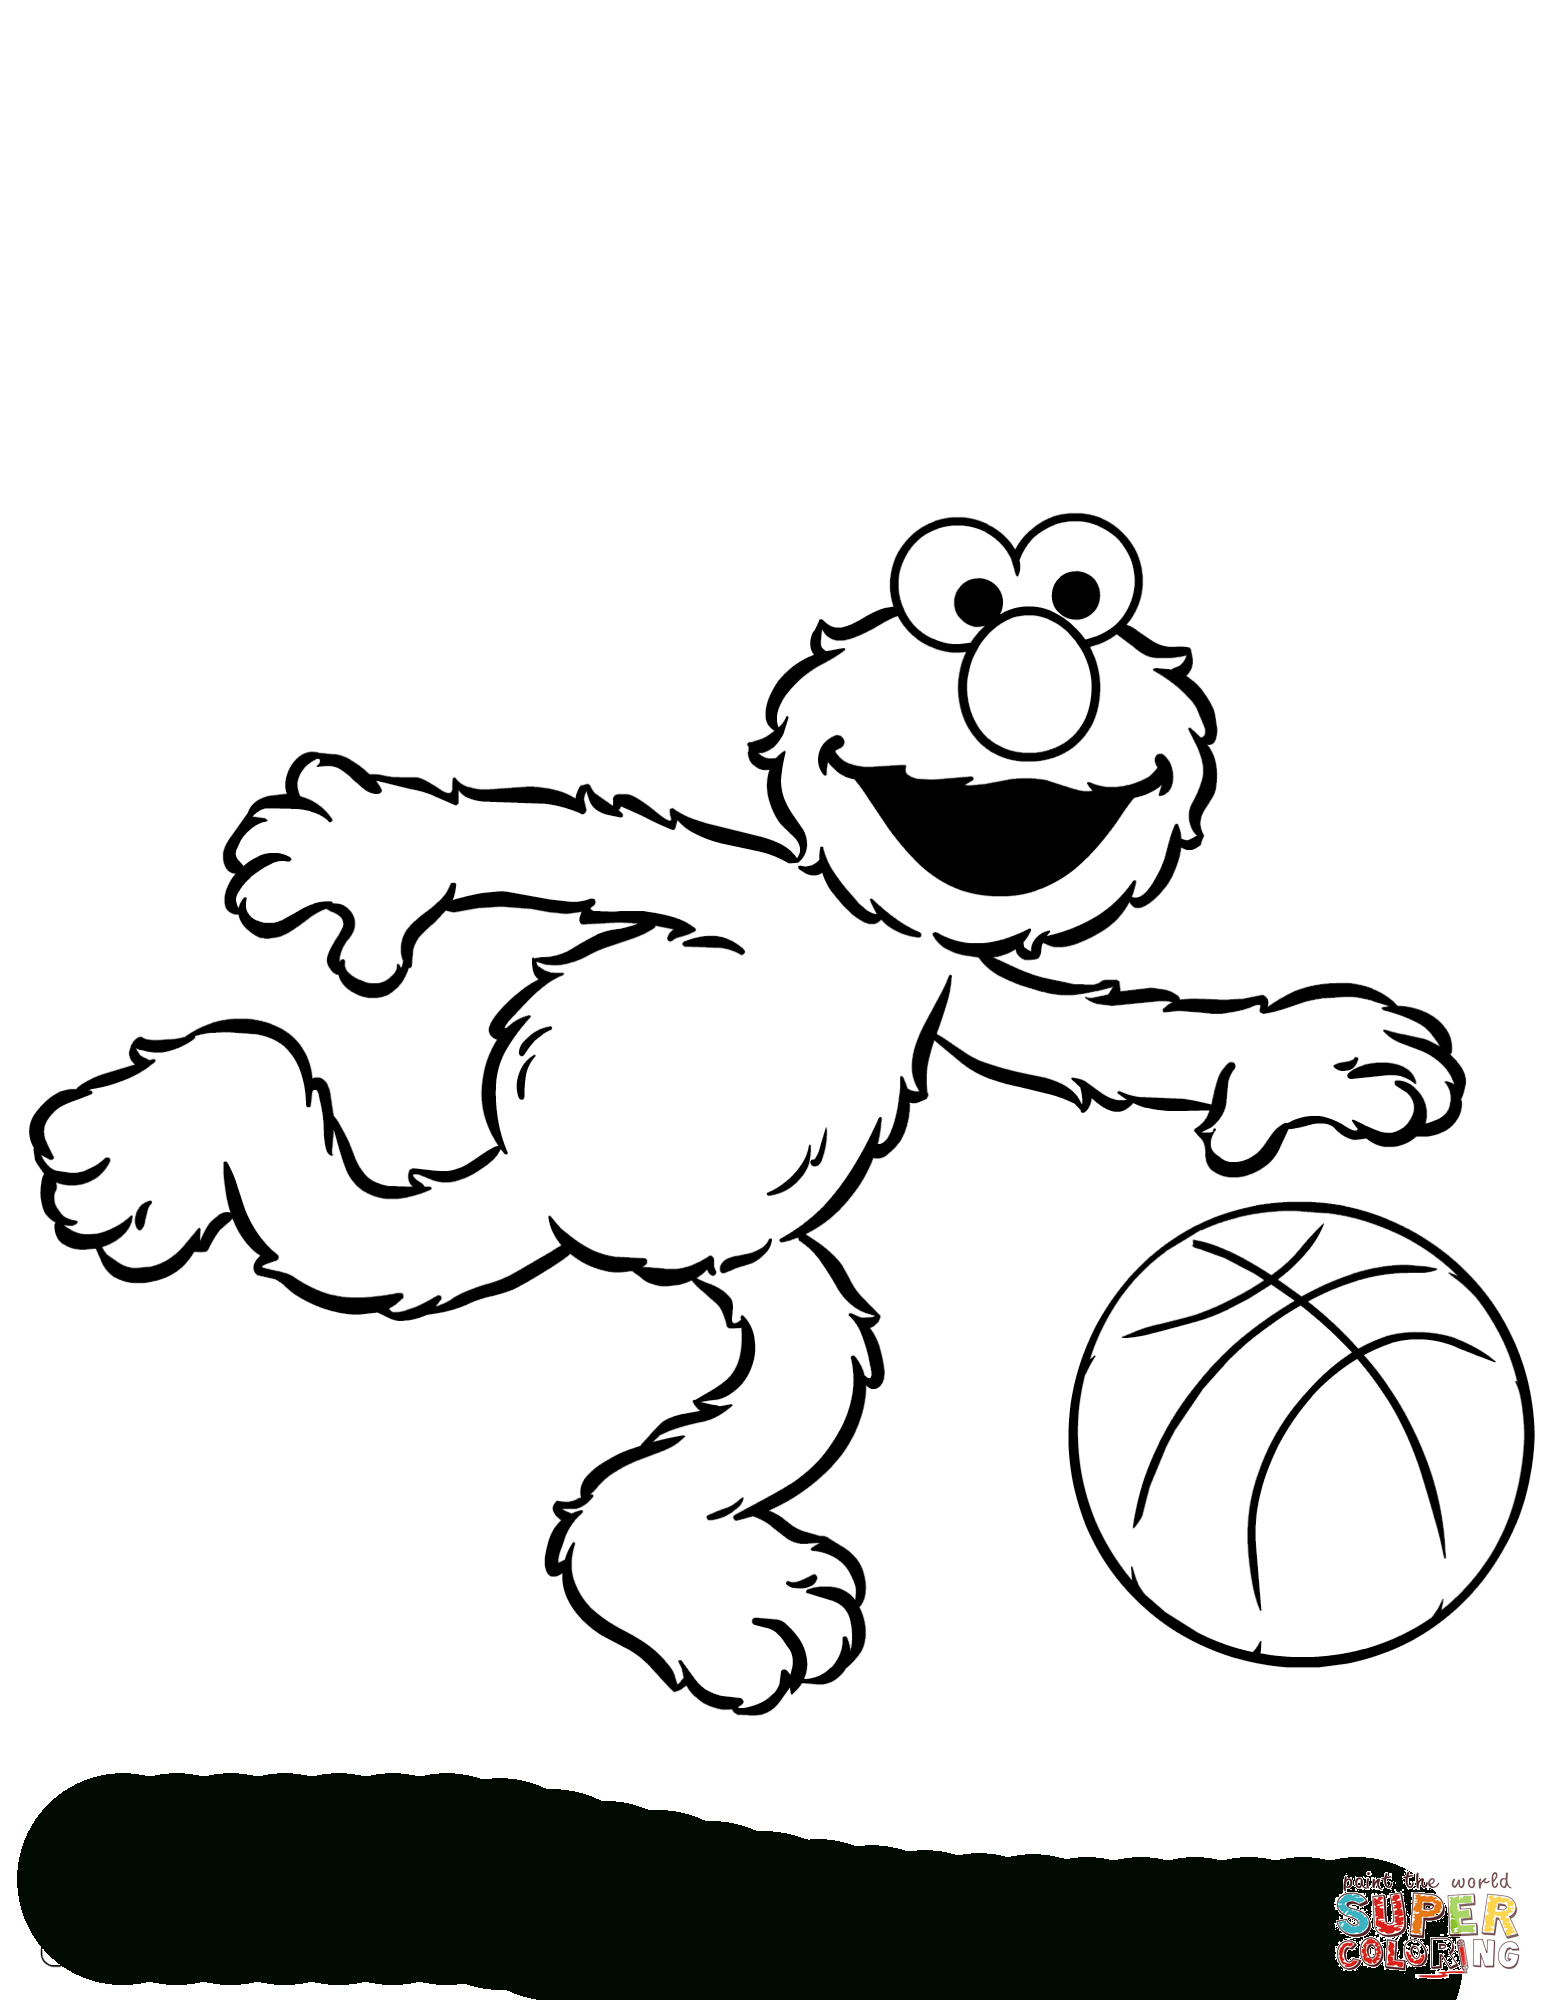 Elmo Plays Basketball Coloring Page | Free Printable Coloring Pages - Elmo Color Pages Free Printable